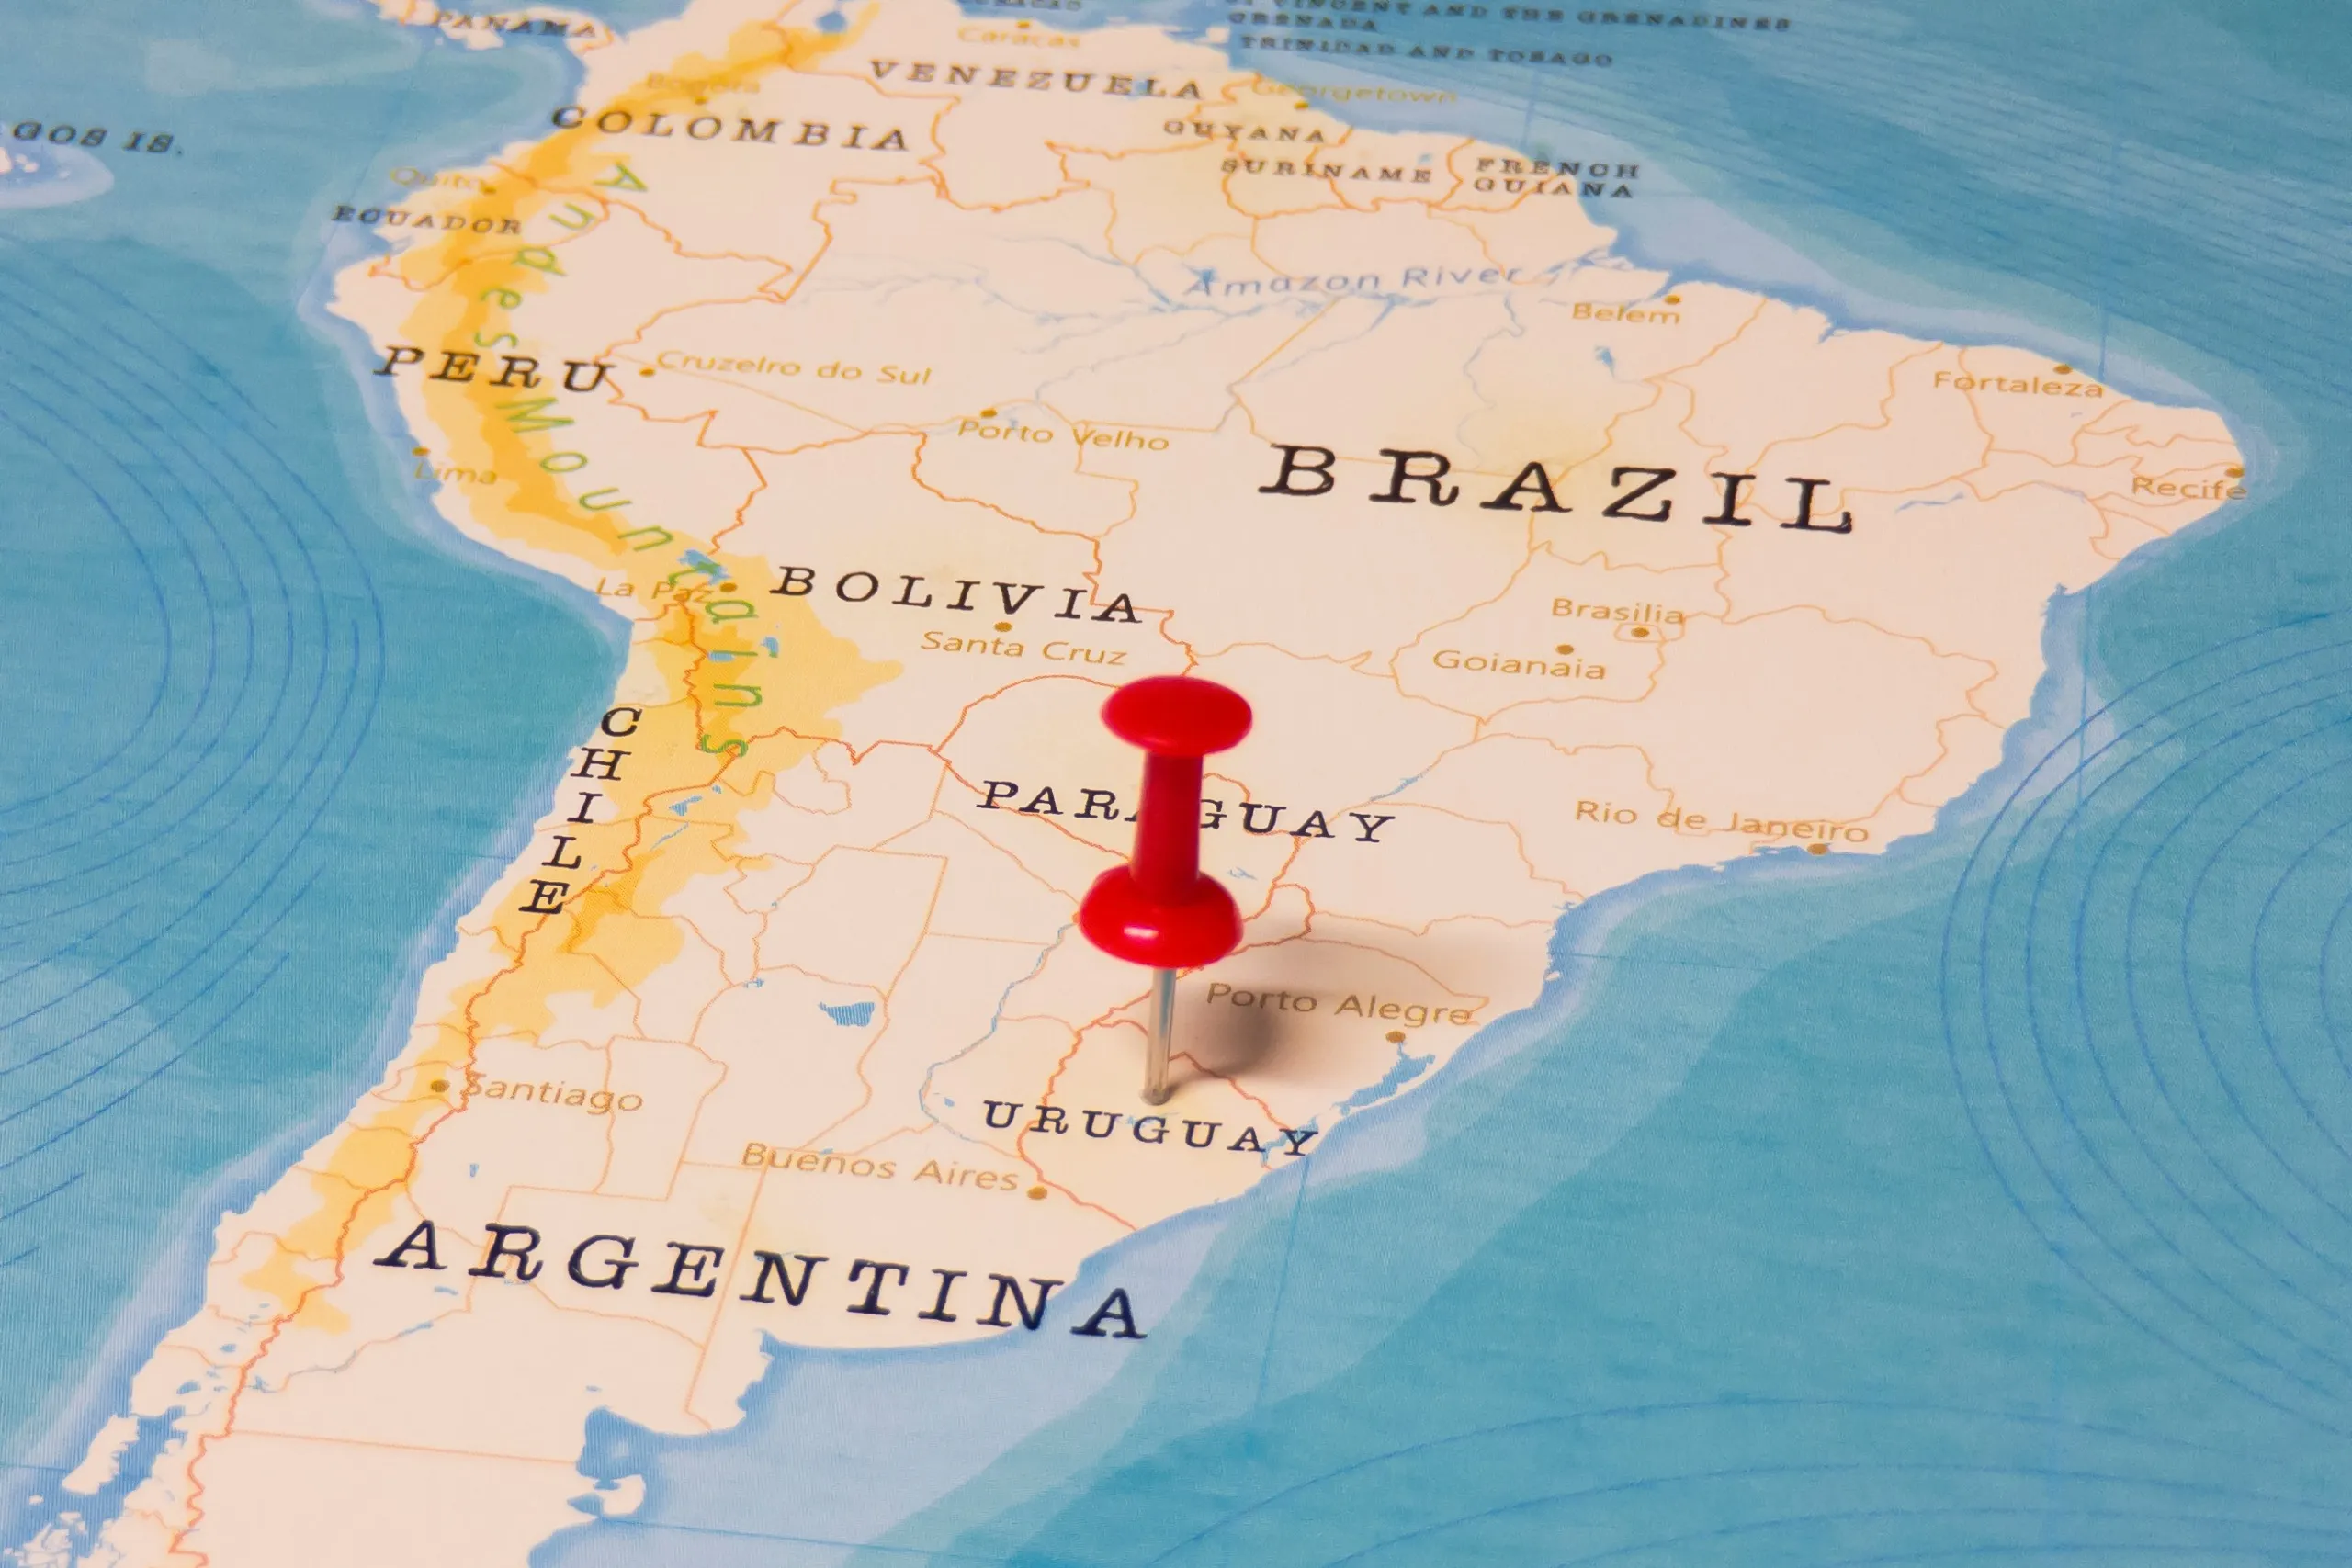 Map with a pin marking the location of Uruguay on it